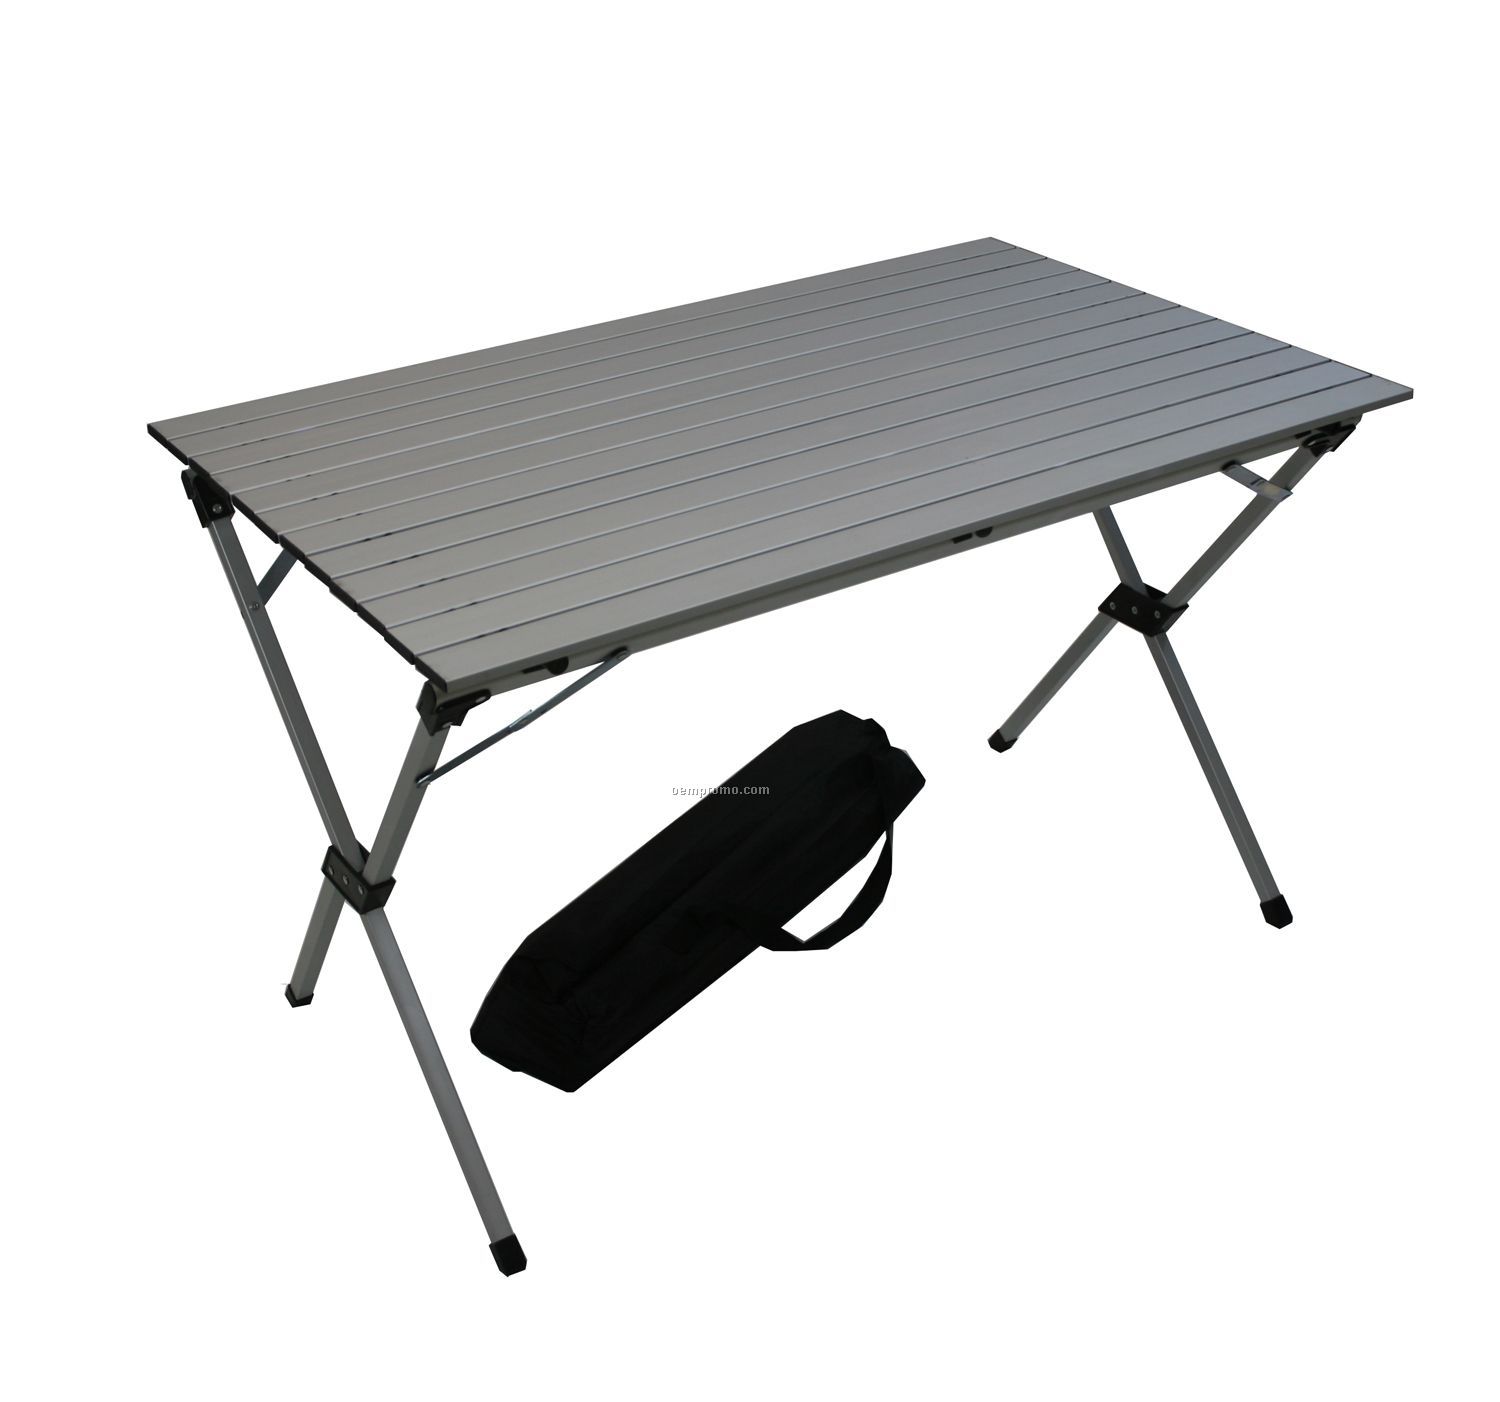 Large Picnic Aluminum Portable Table In A Bag (43"X27"X27")